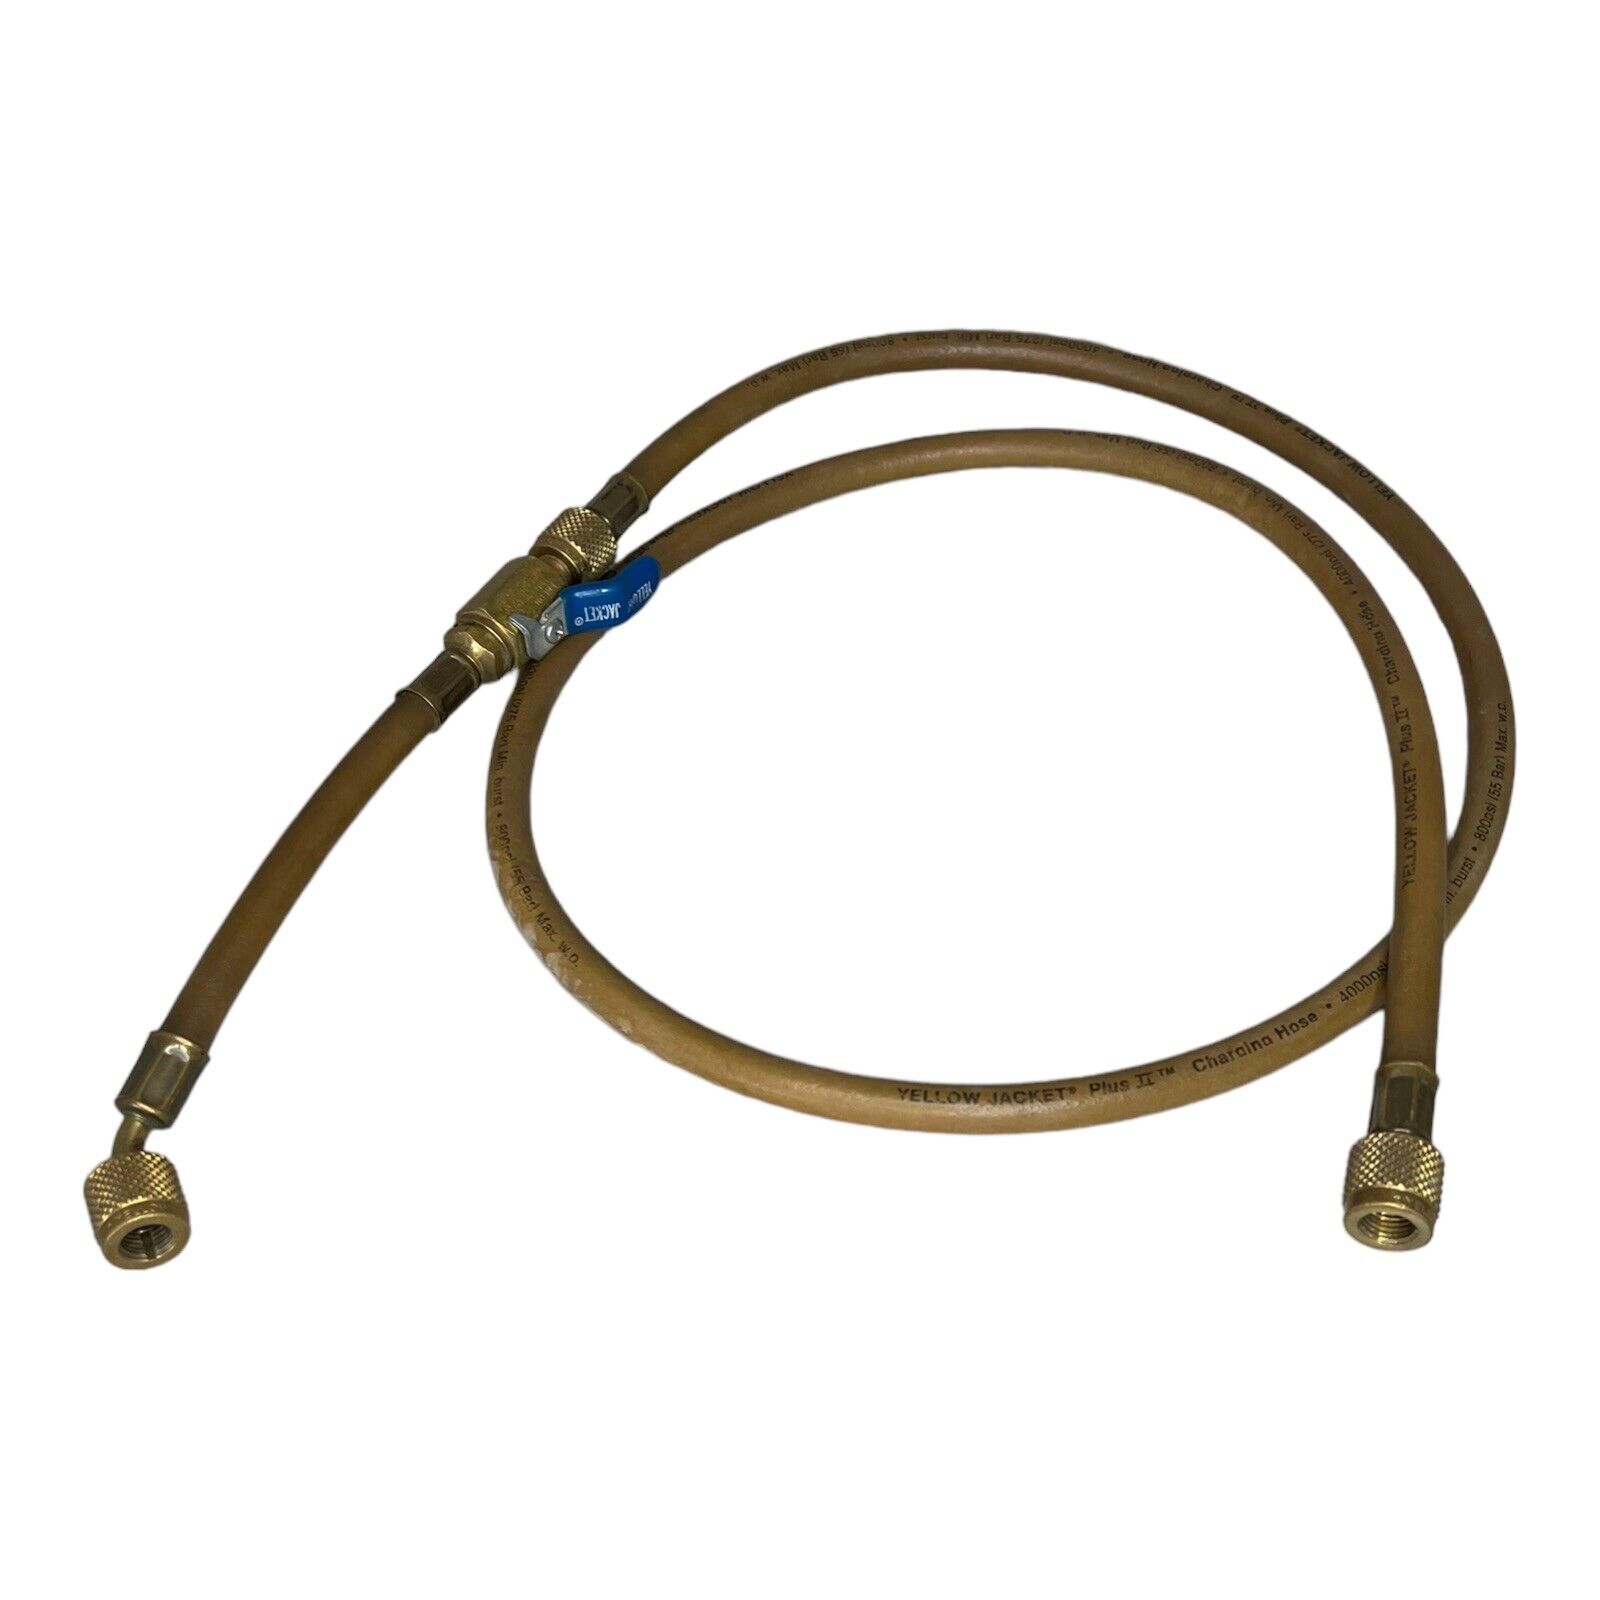 Yellow Jacket Brass Charging Hose Ritchie Engr 800 PSI 2013 